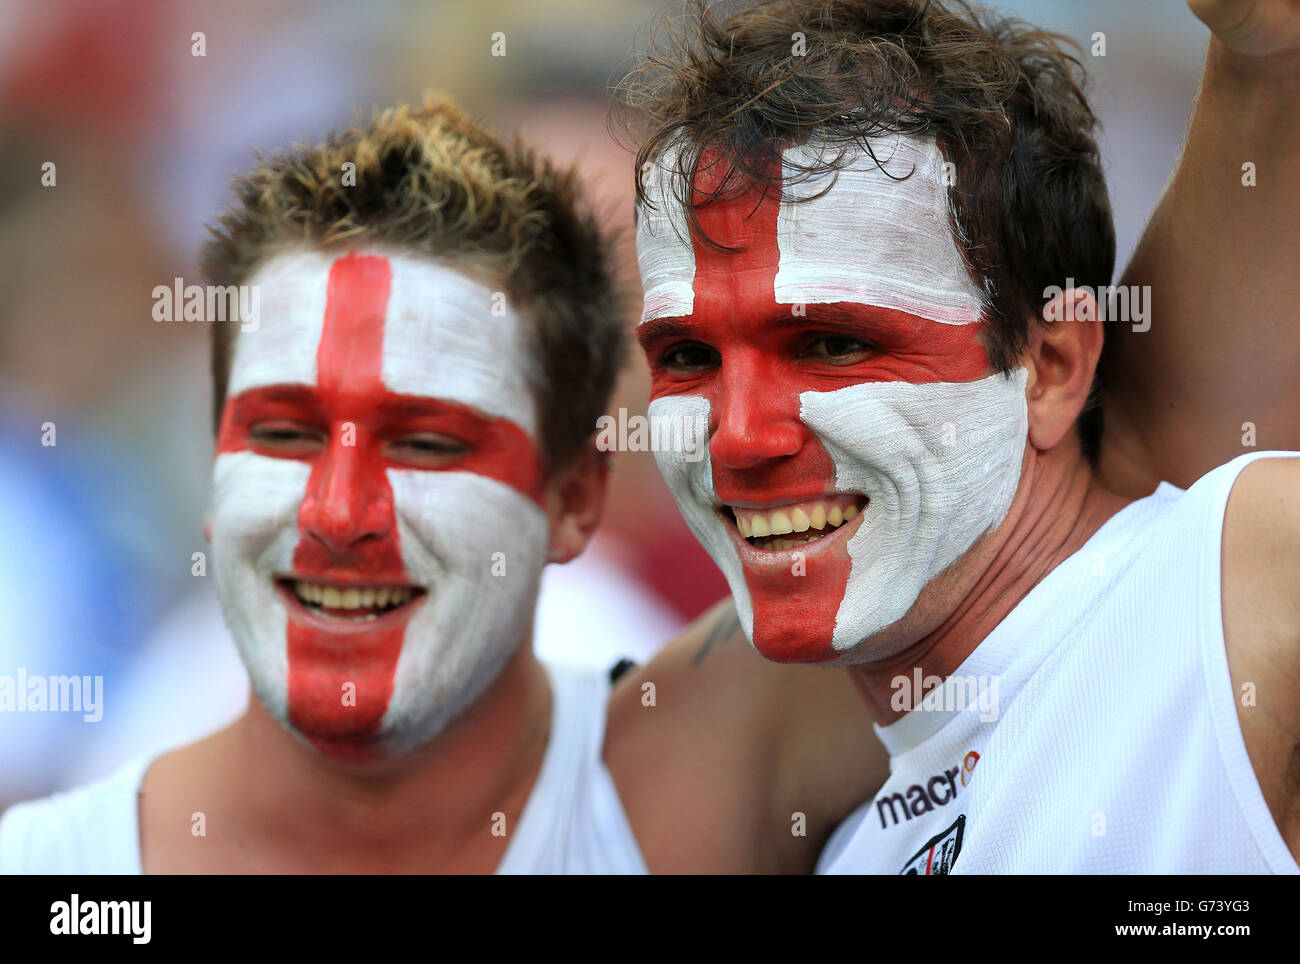 England fans show support for their team before kick-off in the FIFA World Cup, Group D match at the Arena da Amazonia, Manaus, Brazil. Stock Photo